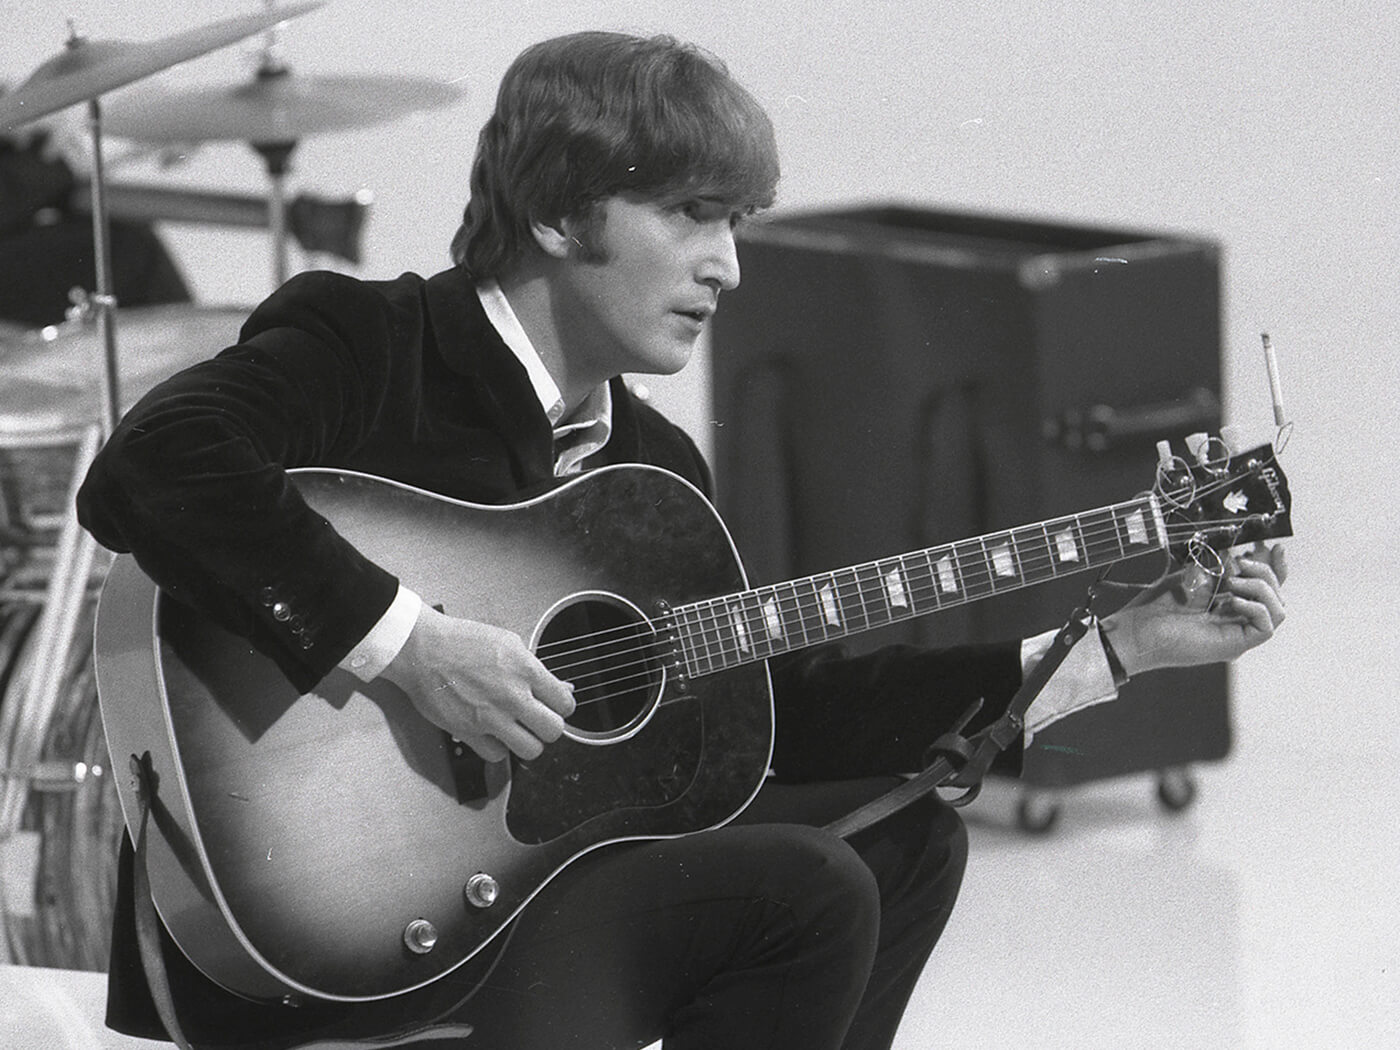 John Lennon tuning his Gibson J-160E during the filming of ‘A Hard Day’s Night’, photo by Max Scheler - K & K/Redferns via Getty Image